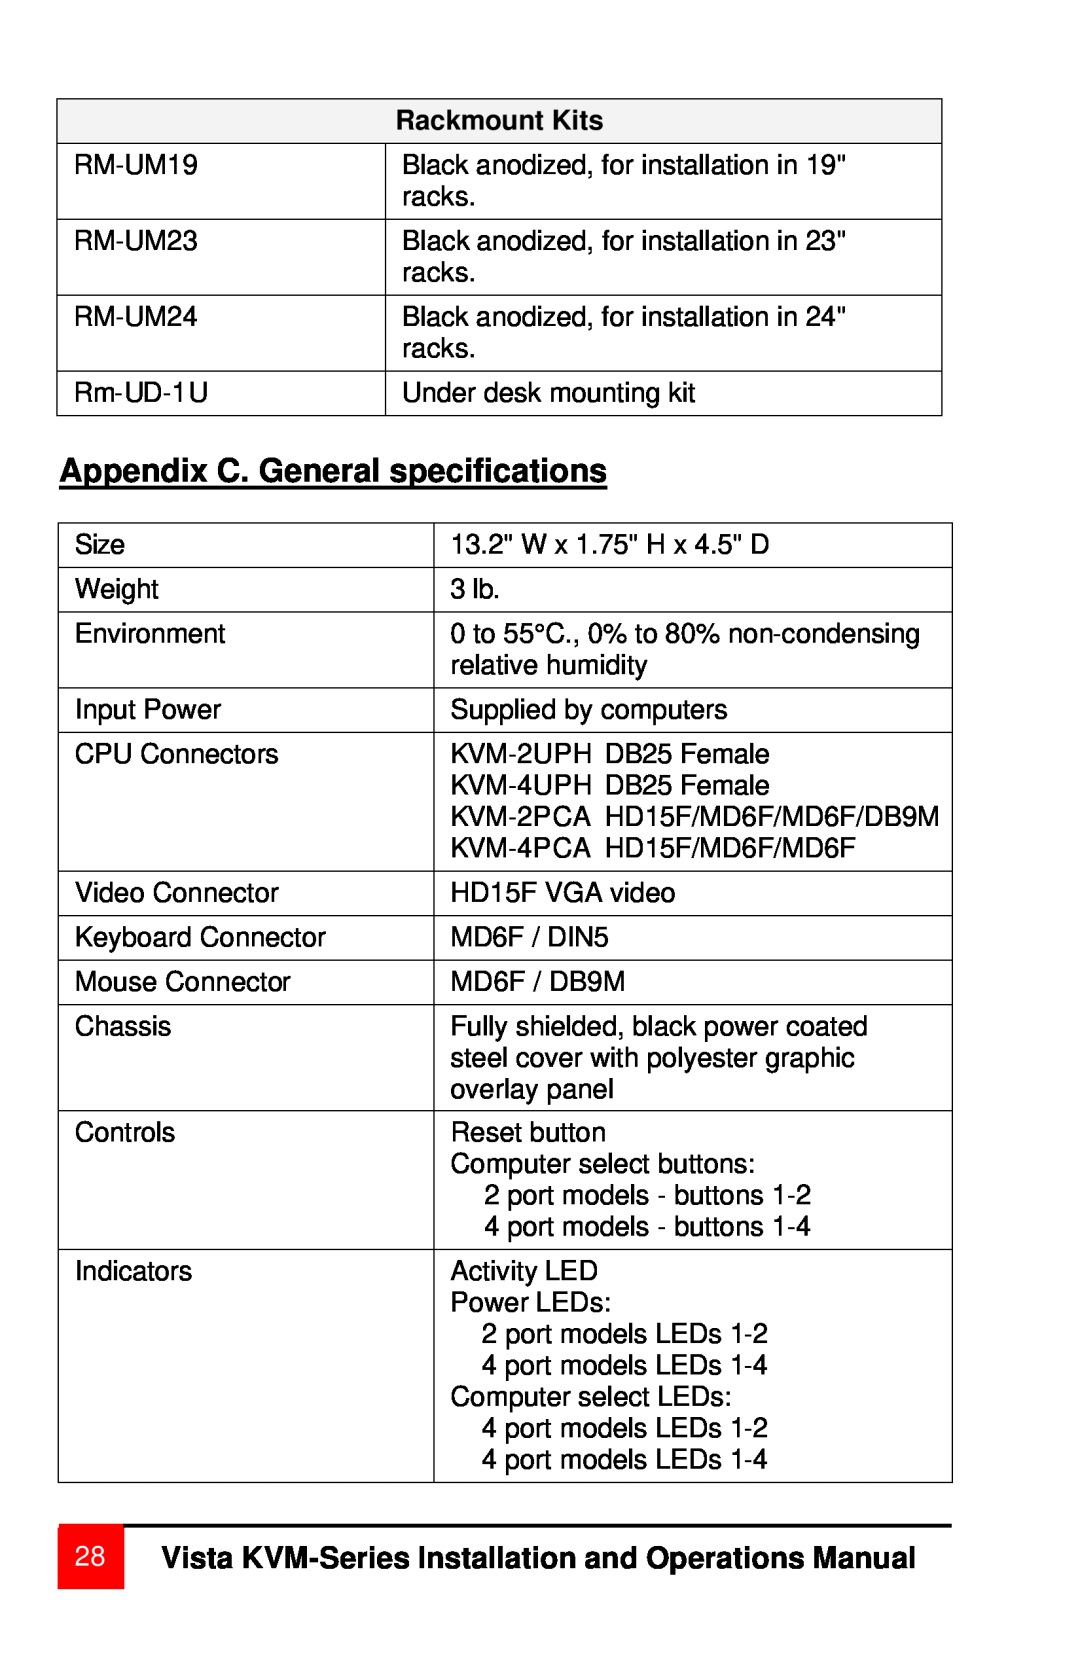 Rose electronic MAN-V8 manual Appendix C. General specifications, Vista KVM-Series Installation and Operations Manual 